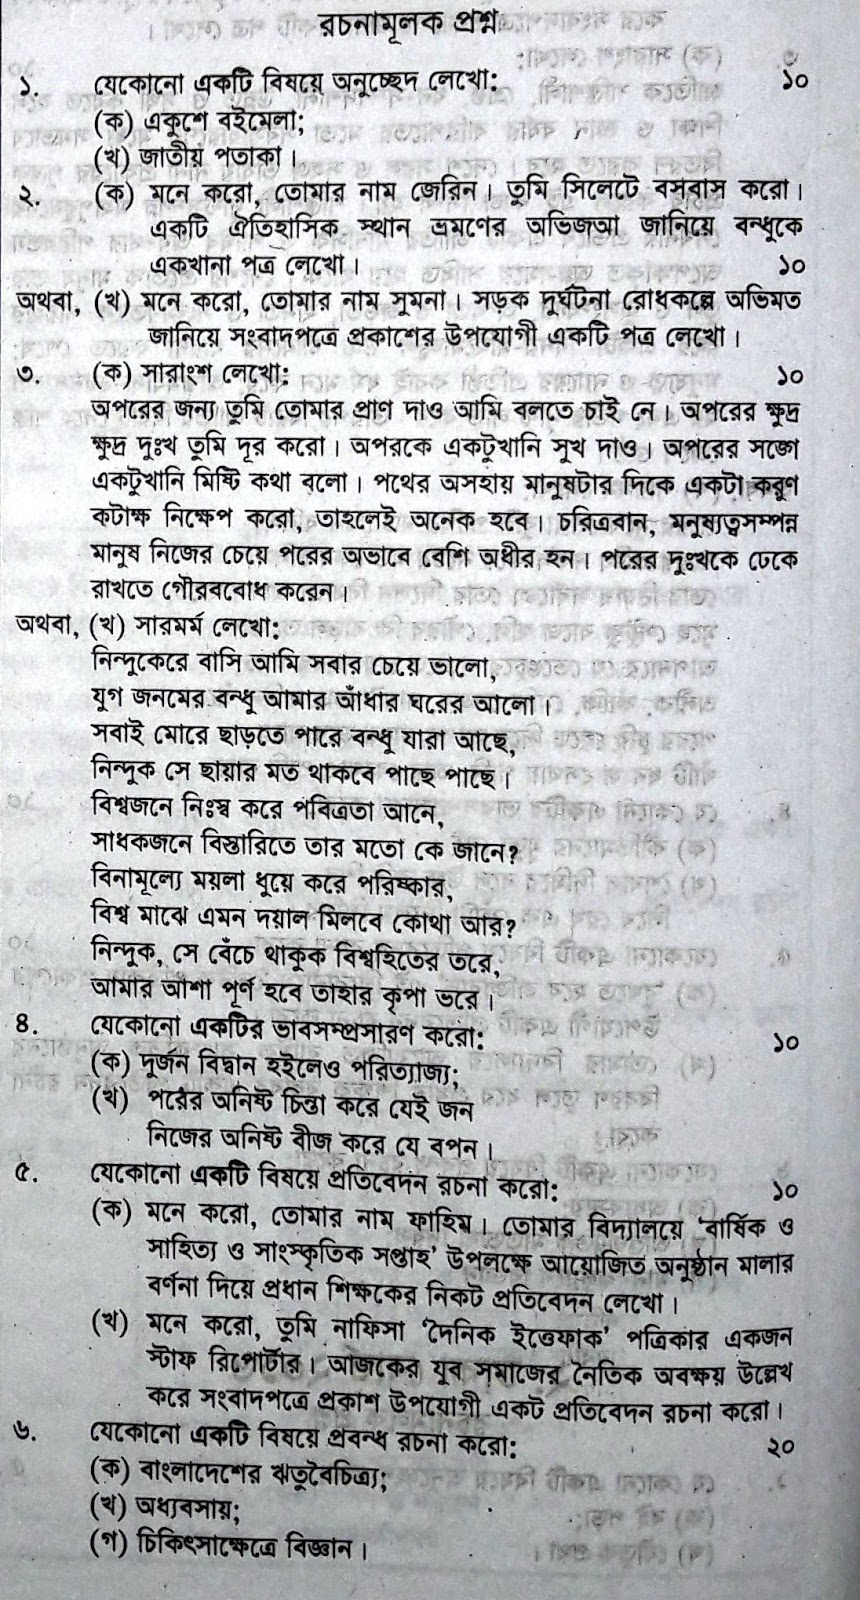 ssc Bangla 2nd Paper suggestion, question paper, model question, mcq question, question pattern, syllabus for dhaka board, all boards